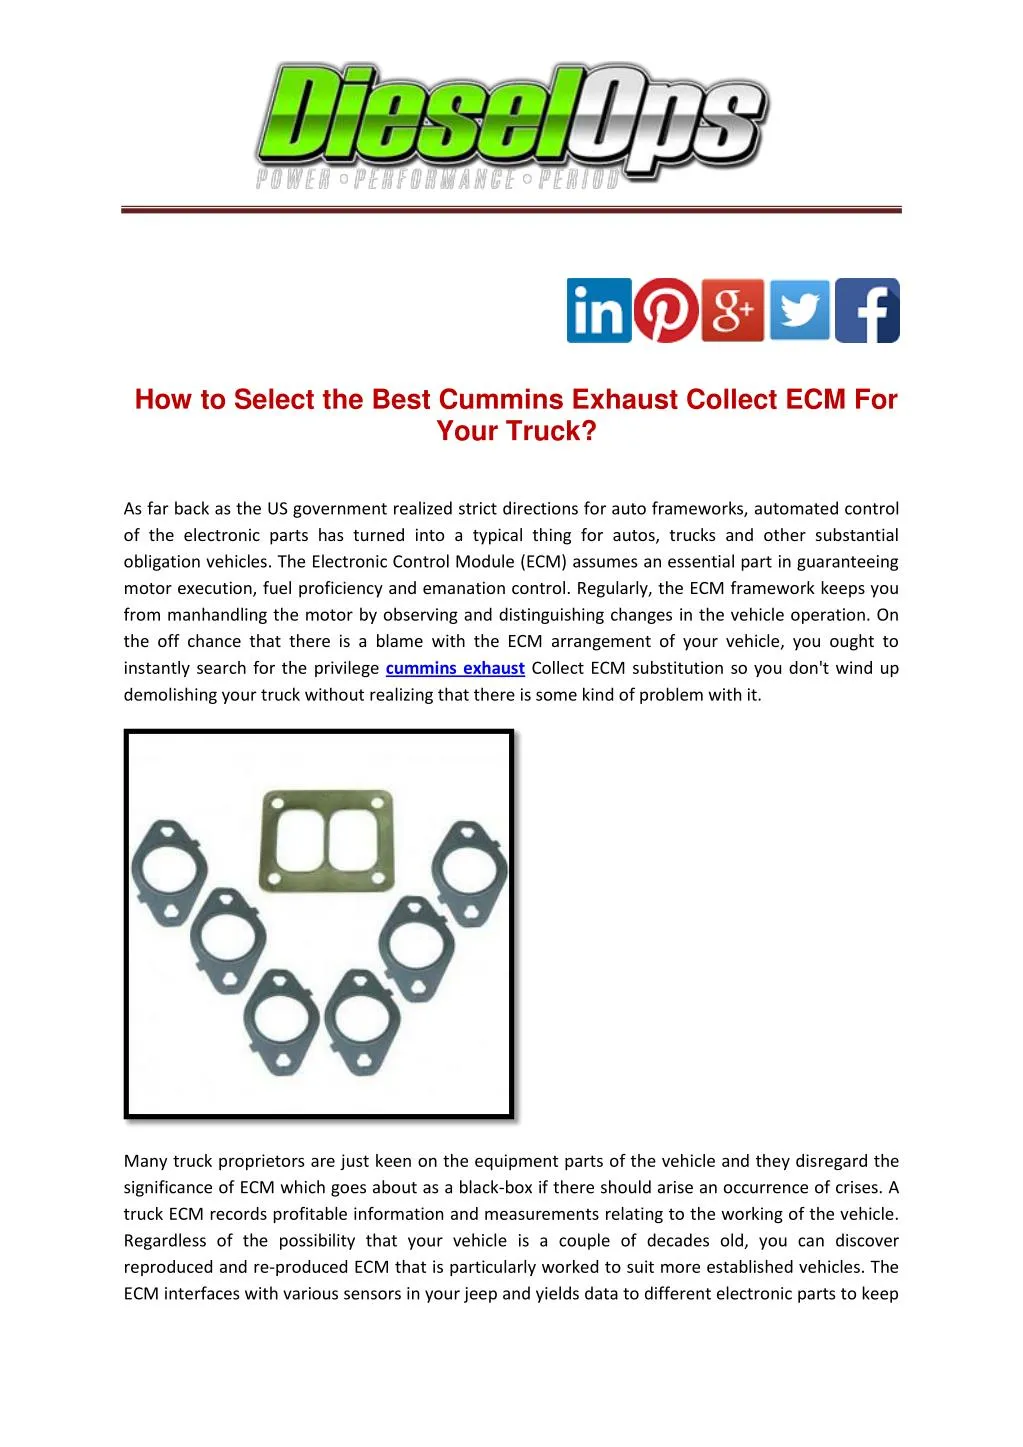 how to select the best cummins exhaust collect